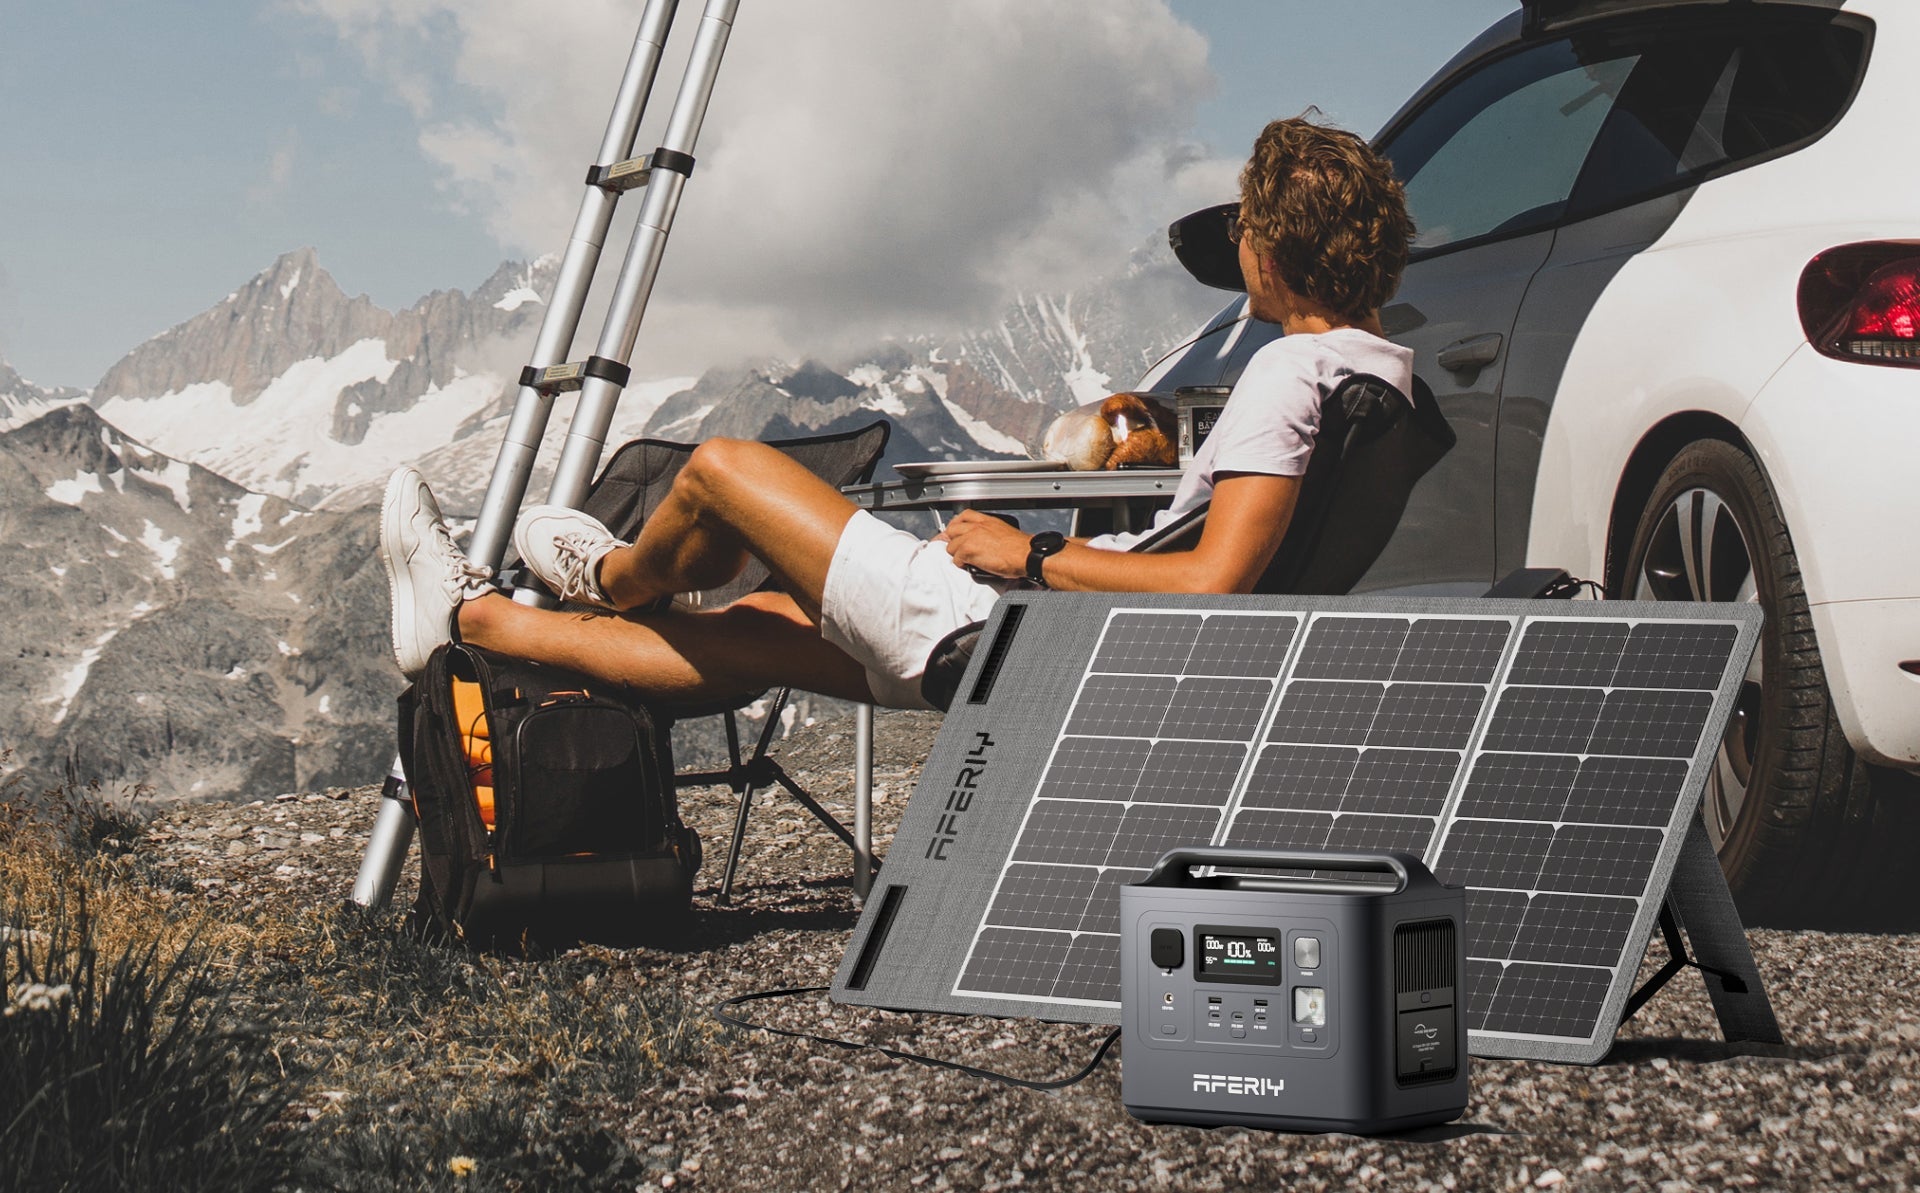 400W solar panel are ideal for camping.